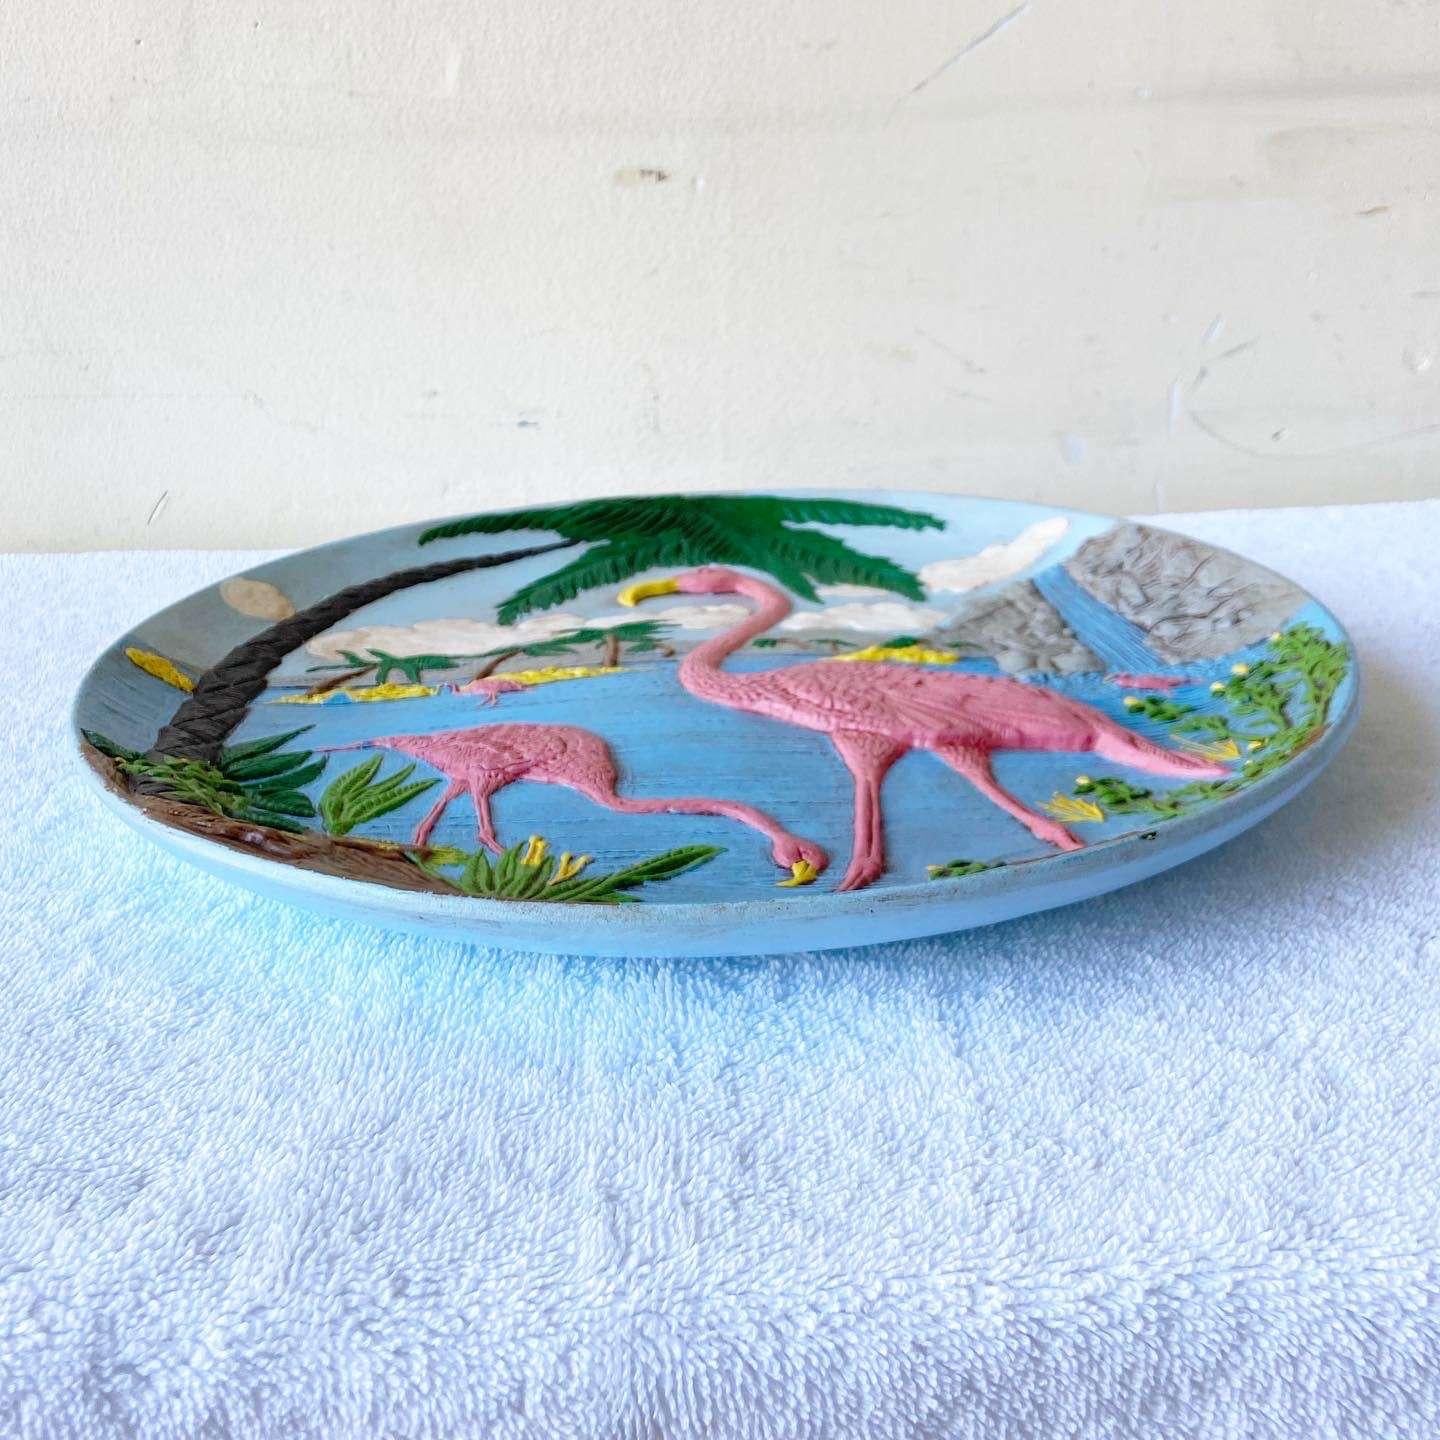 Tropical Pink Flamingo Decorative Ceramic Plate In Good Condition For Sale In Delray Beach, FL